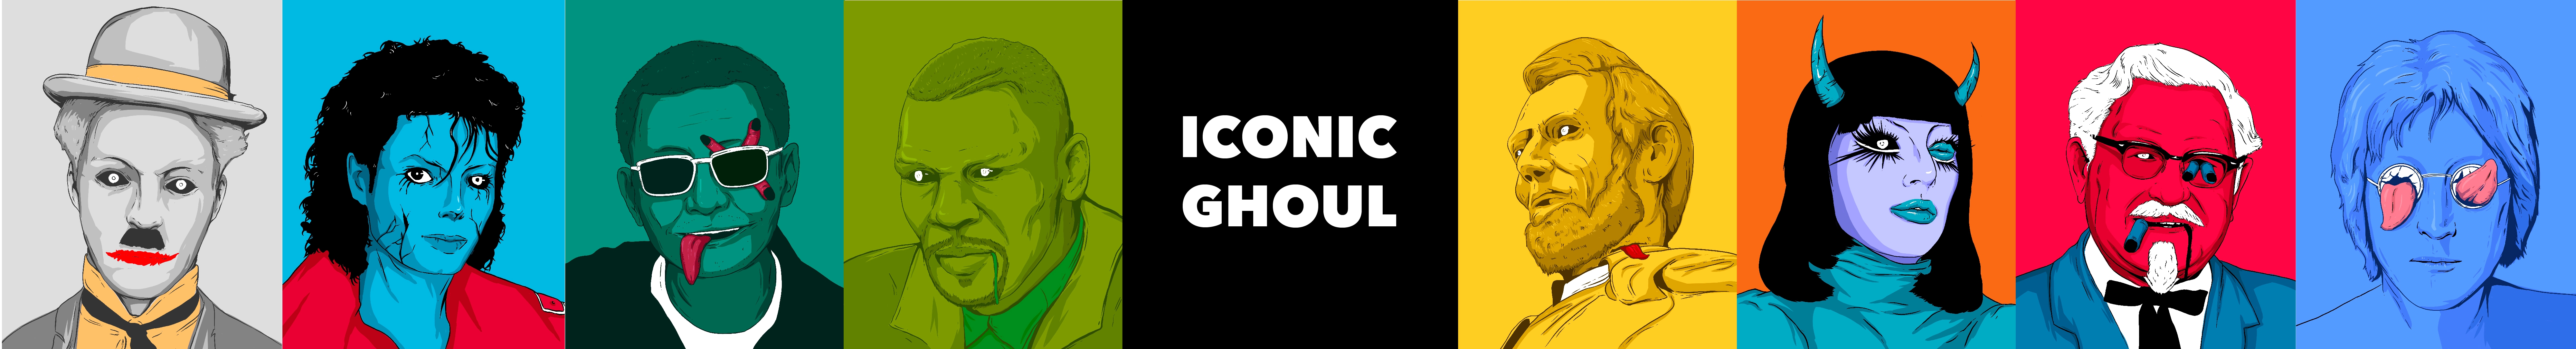 Iconic Ghouls banner